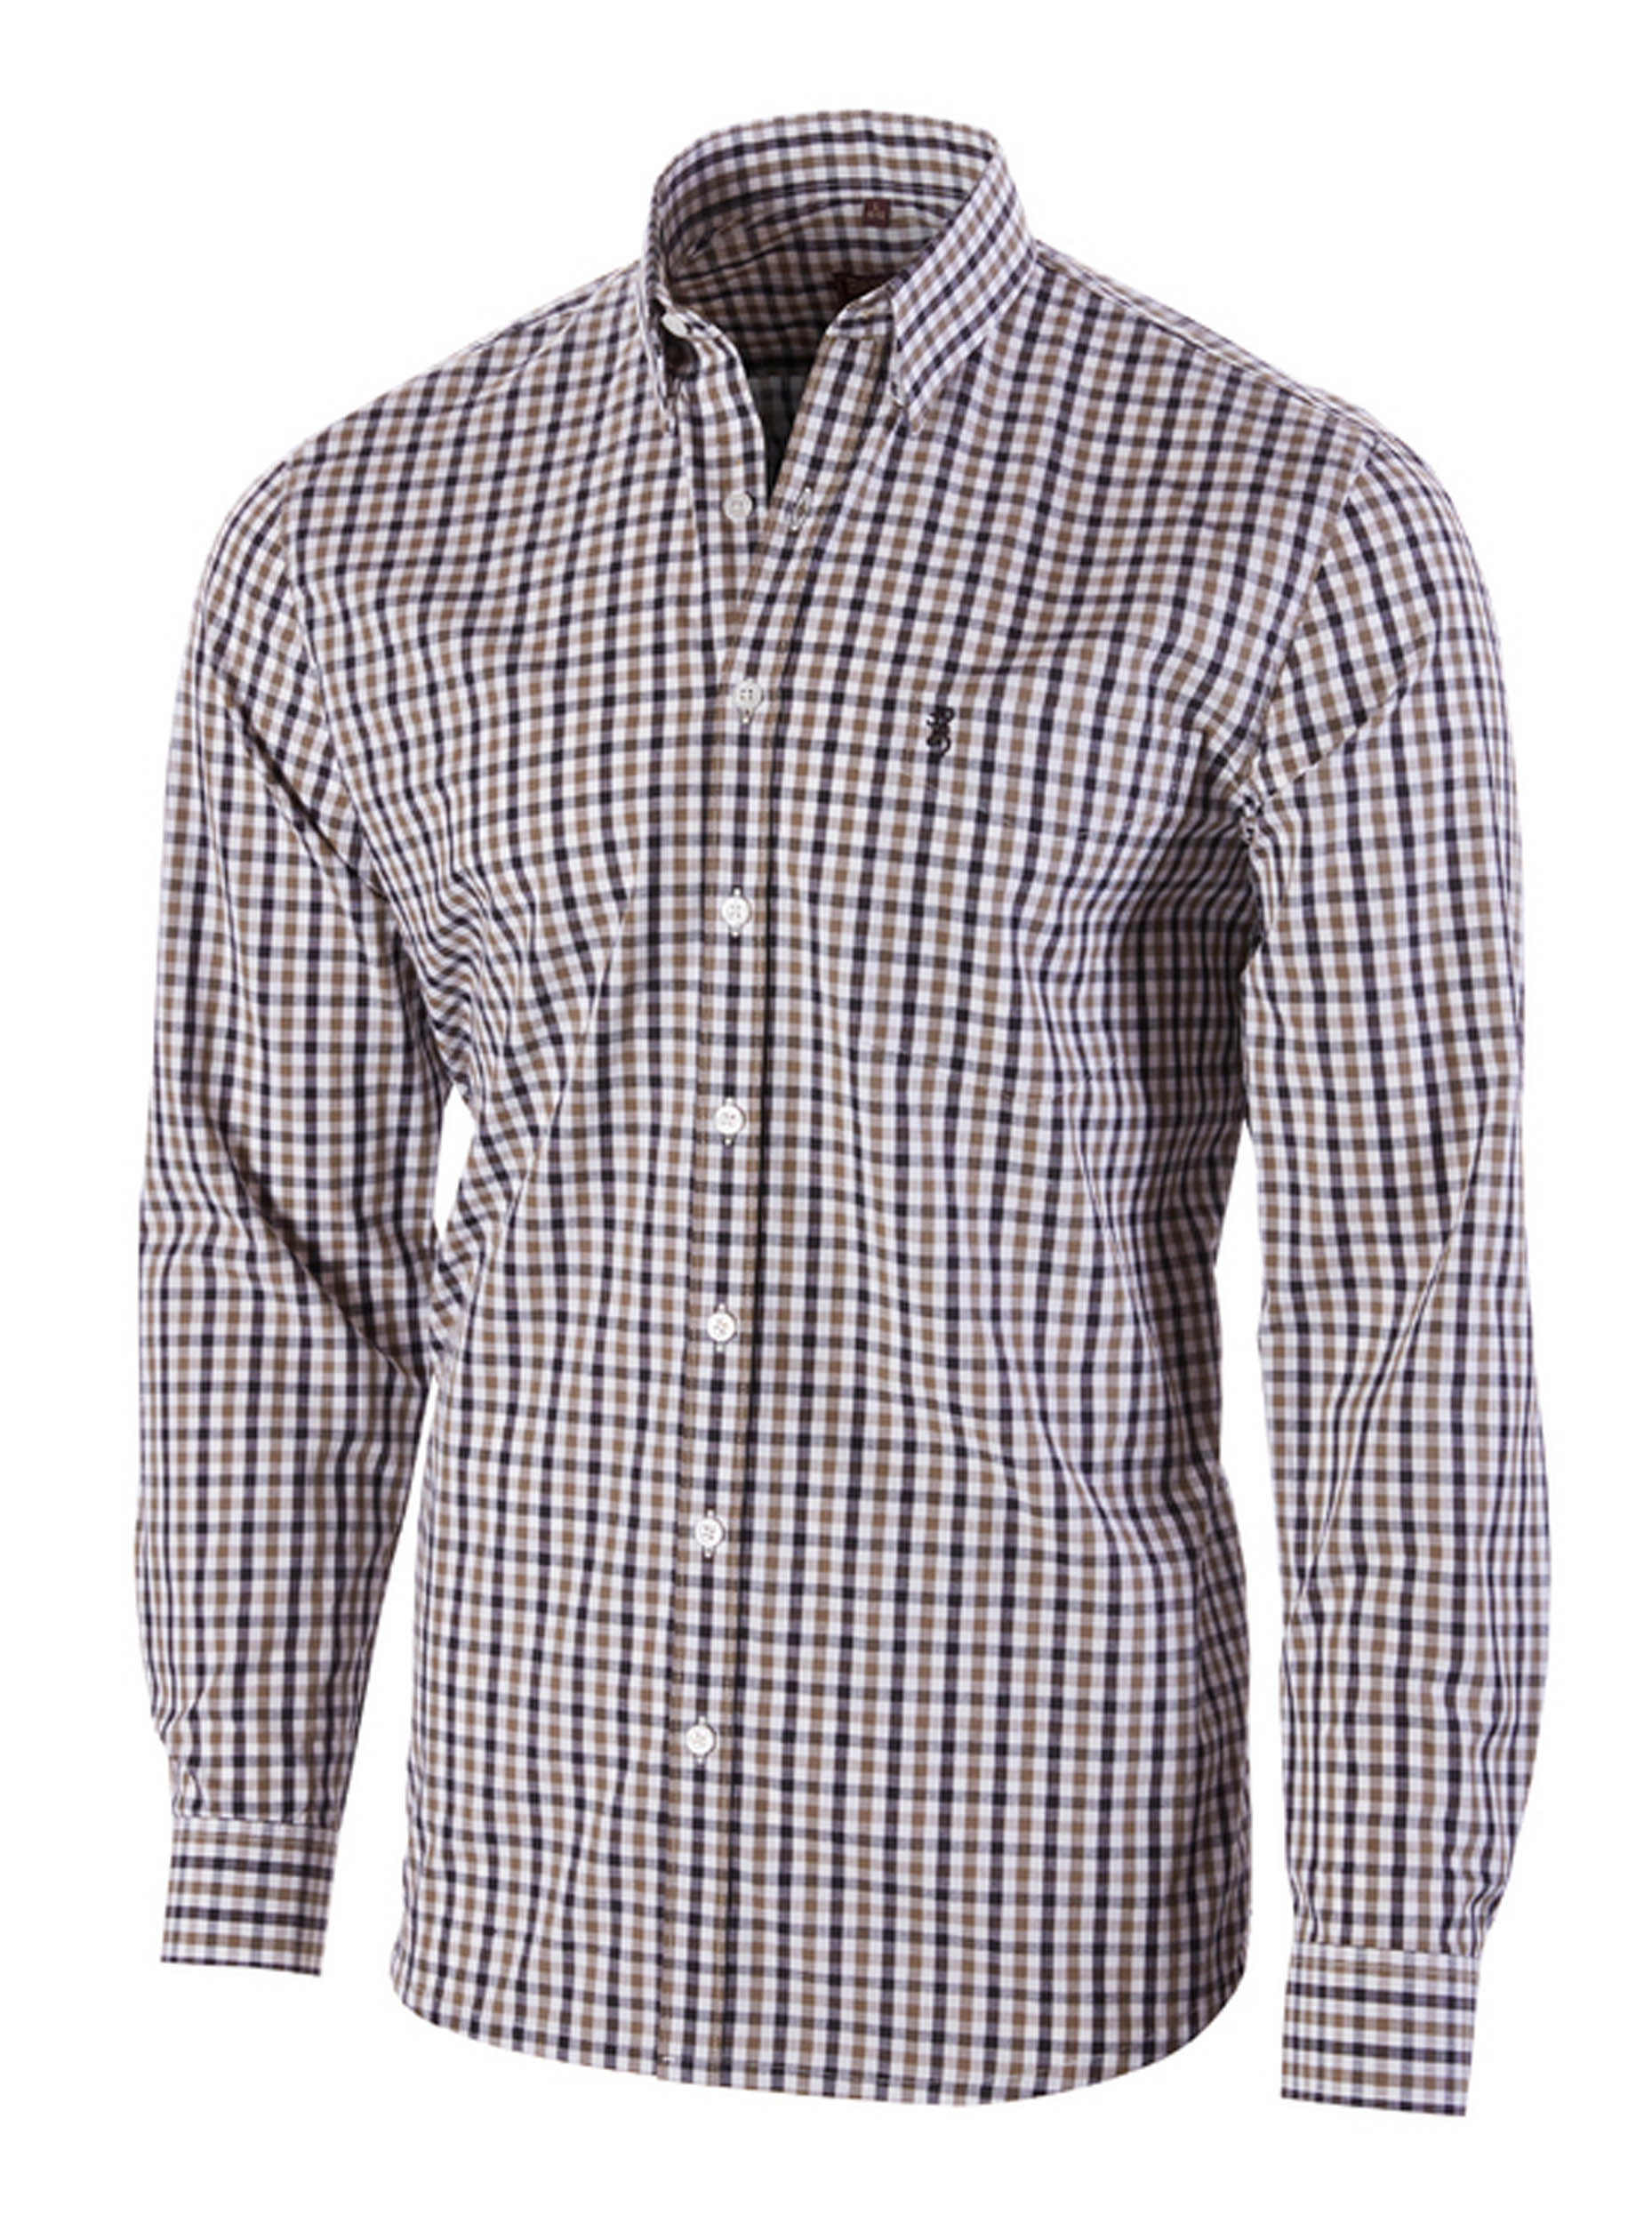 CHEMISE SEAN BRUNE - TAILLE M - Browning